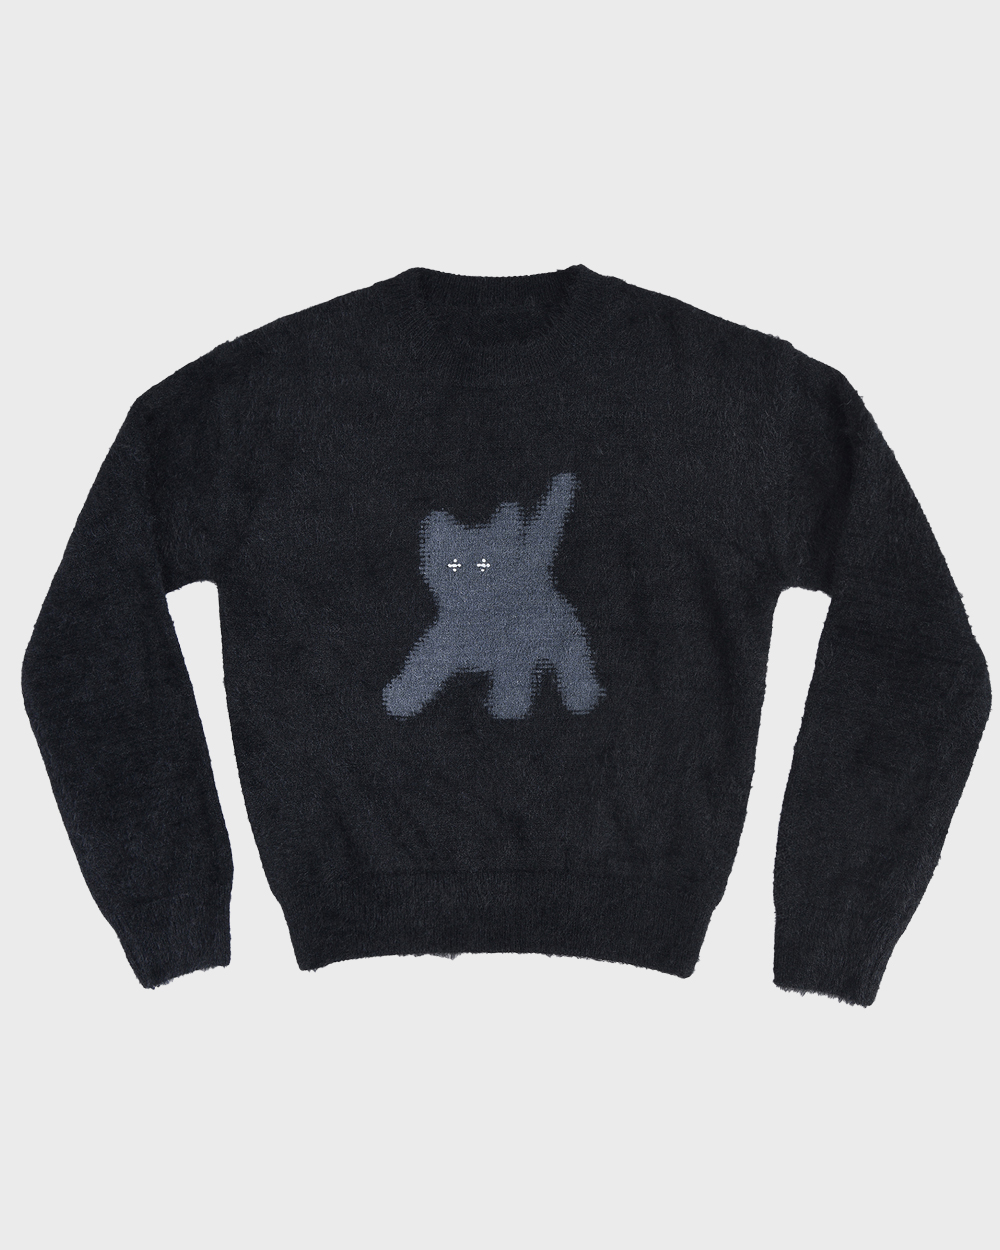 aeae Flashed cats angora knit_Loosed (Black)